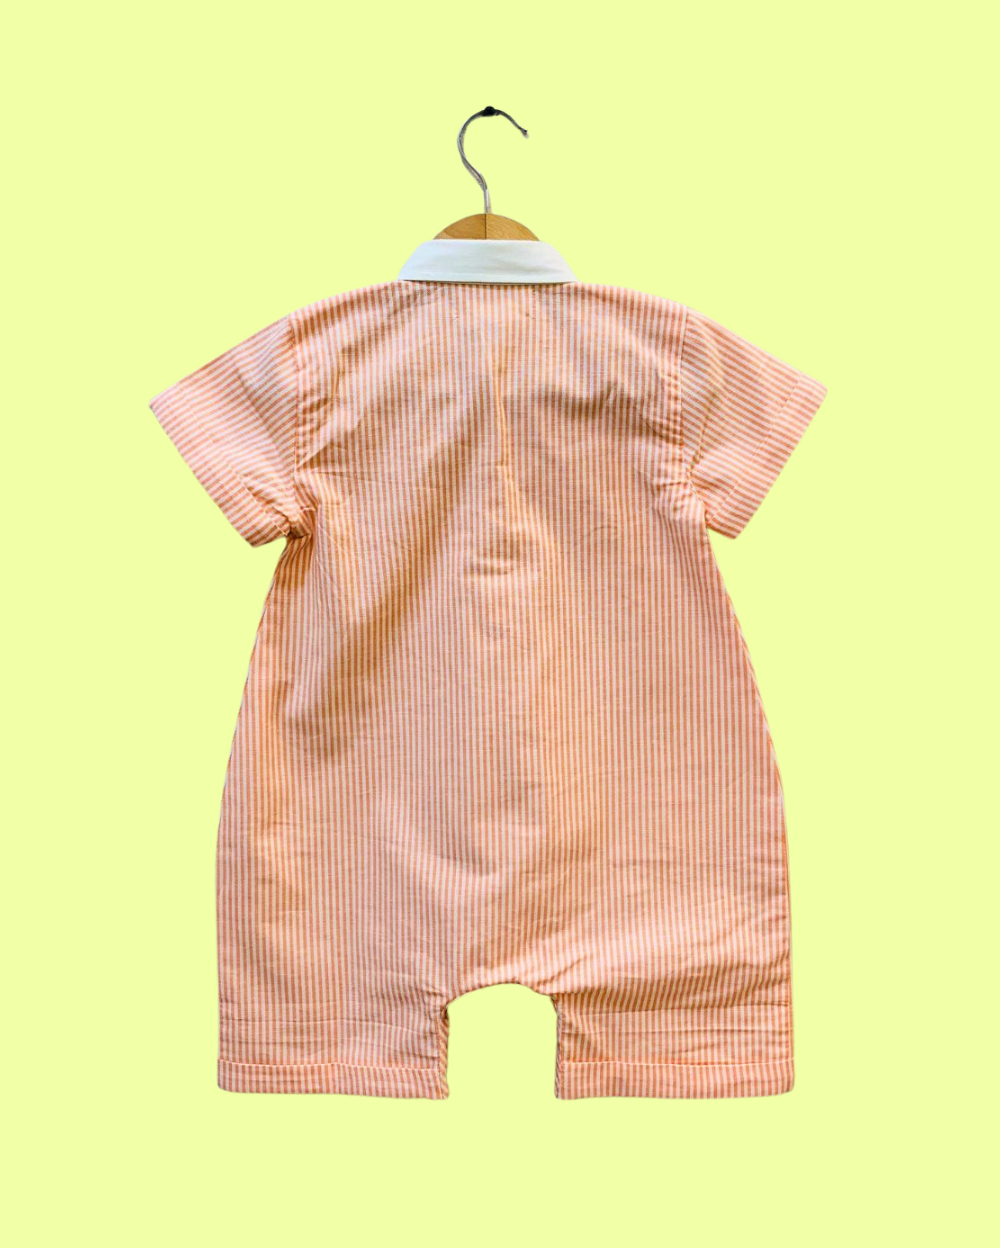 100% Cotton White Top & Yellow Shorts Baby Set' and 'Orange Striped Romper for Baby Boys - 2 Piece Set